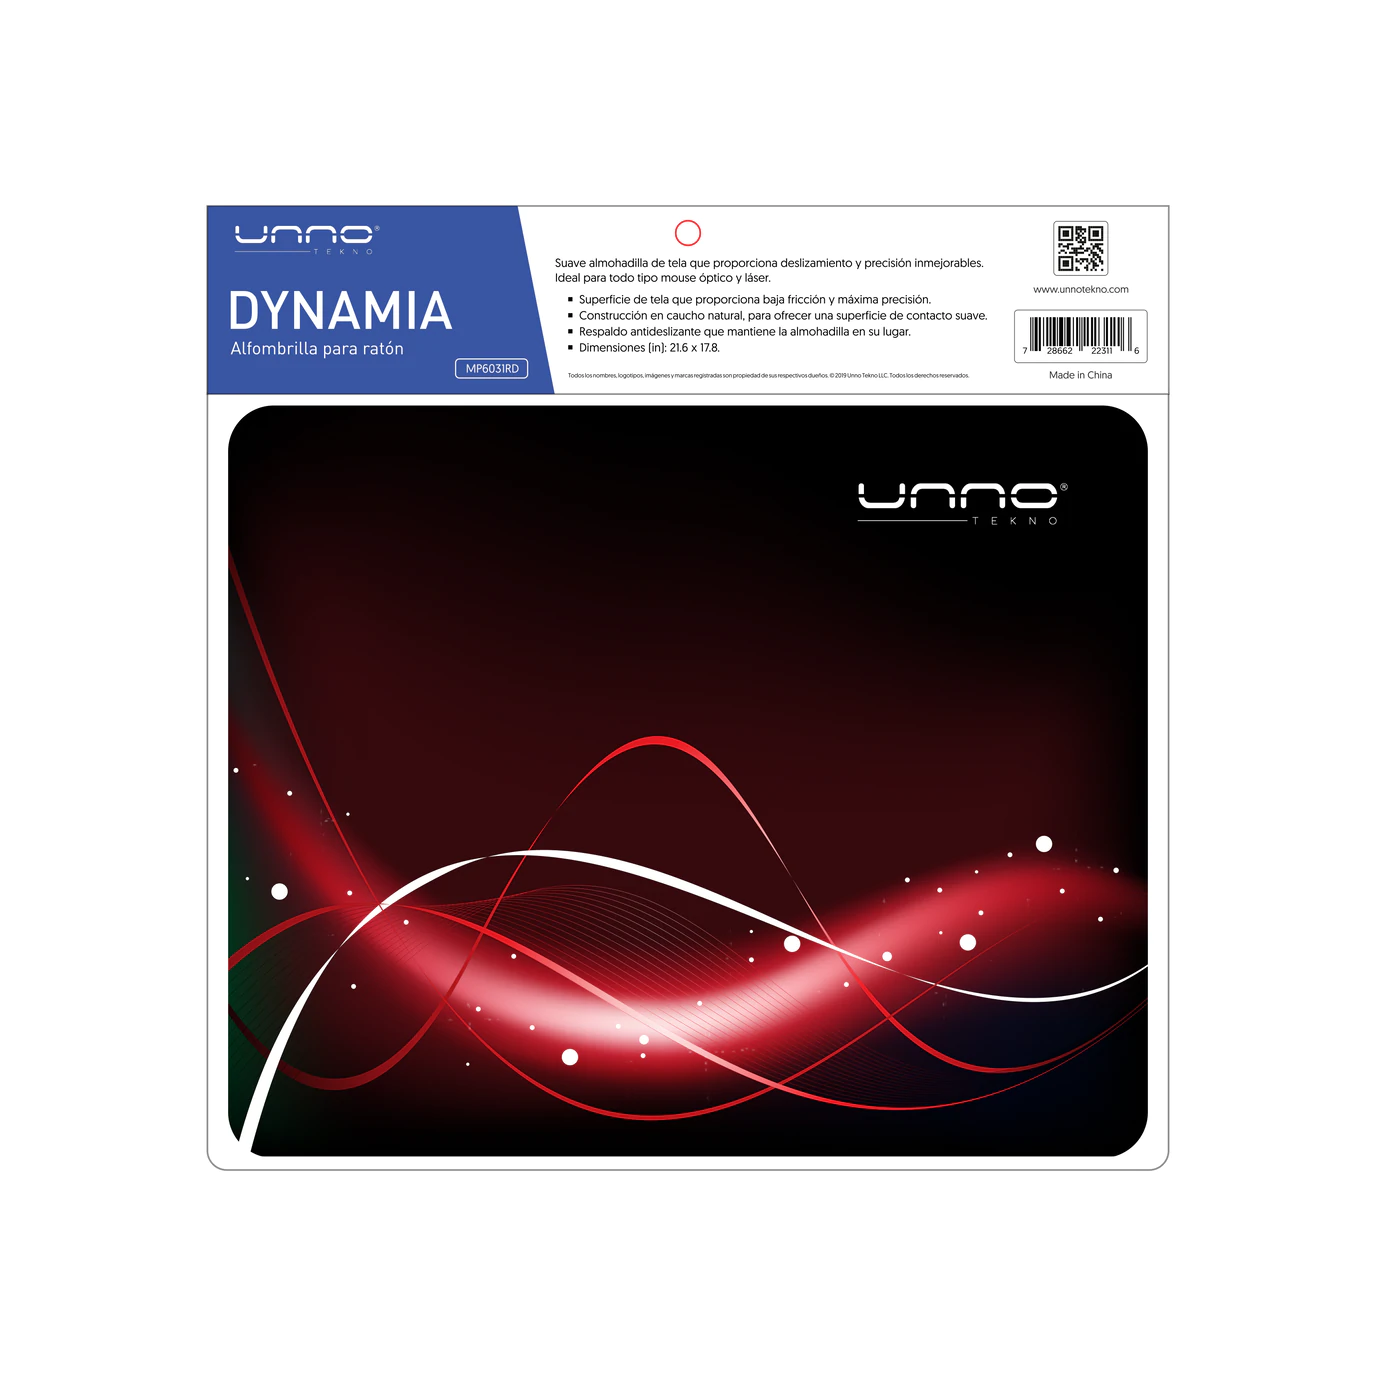 https://unnotekno.com/wp-content/uploads/2022/03/MP6031RD_-_Mouse_Pad_Dynamia_Red_w_hanger_-_1000_x_1000_1376x1376.webp